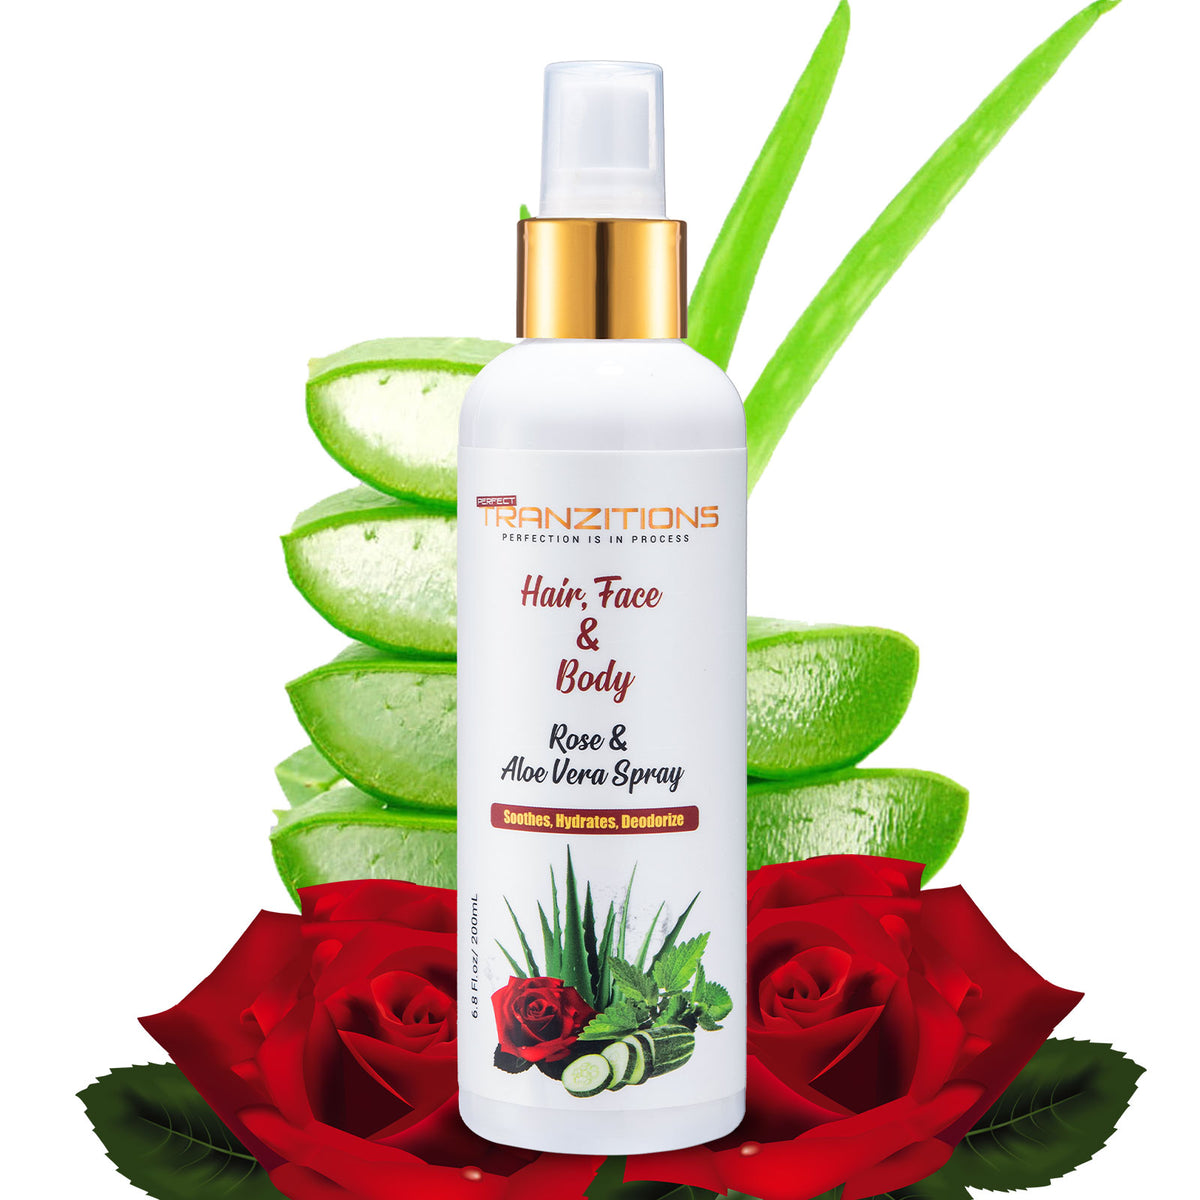 Aloe Vera & Rose Water For Hair For Locs Organic Rose Water Loc Moisturizer Spray For Dreads - Nourishing & Moisturizing Rose Water Spray For Hair & Scalp Refreshing Natural Loc Spray 6.8oz